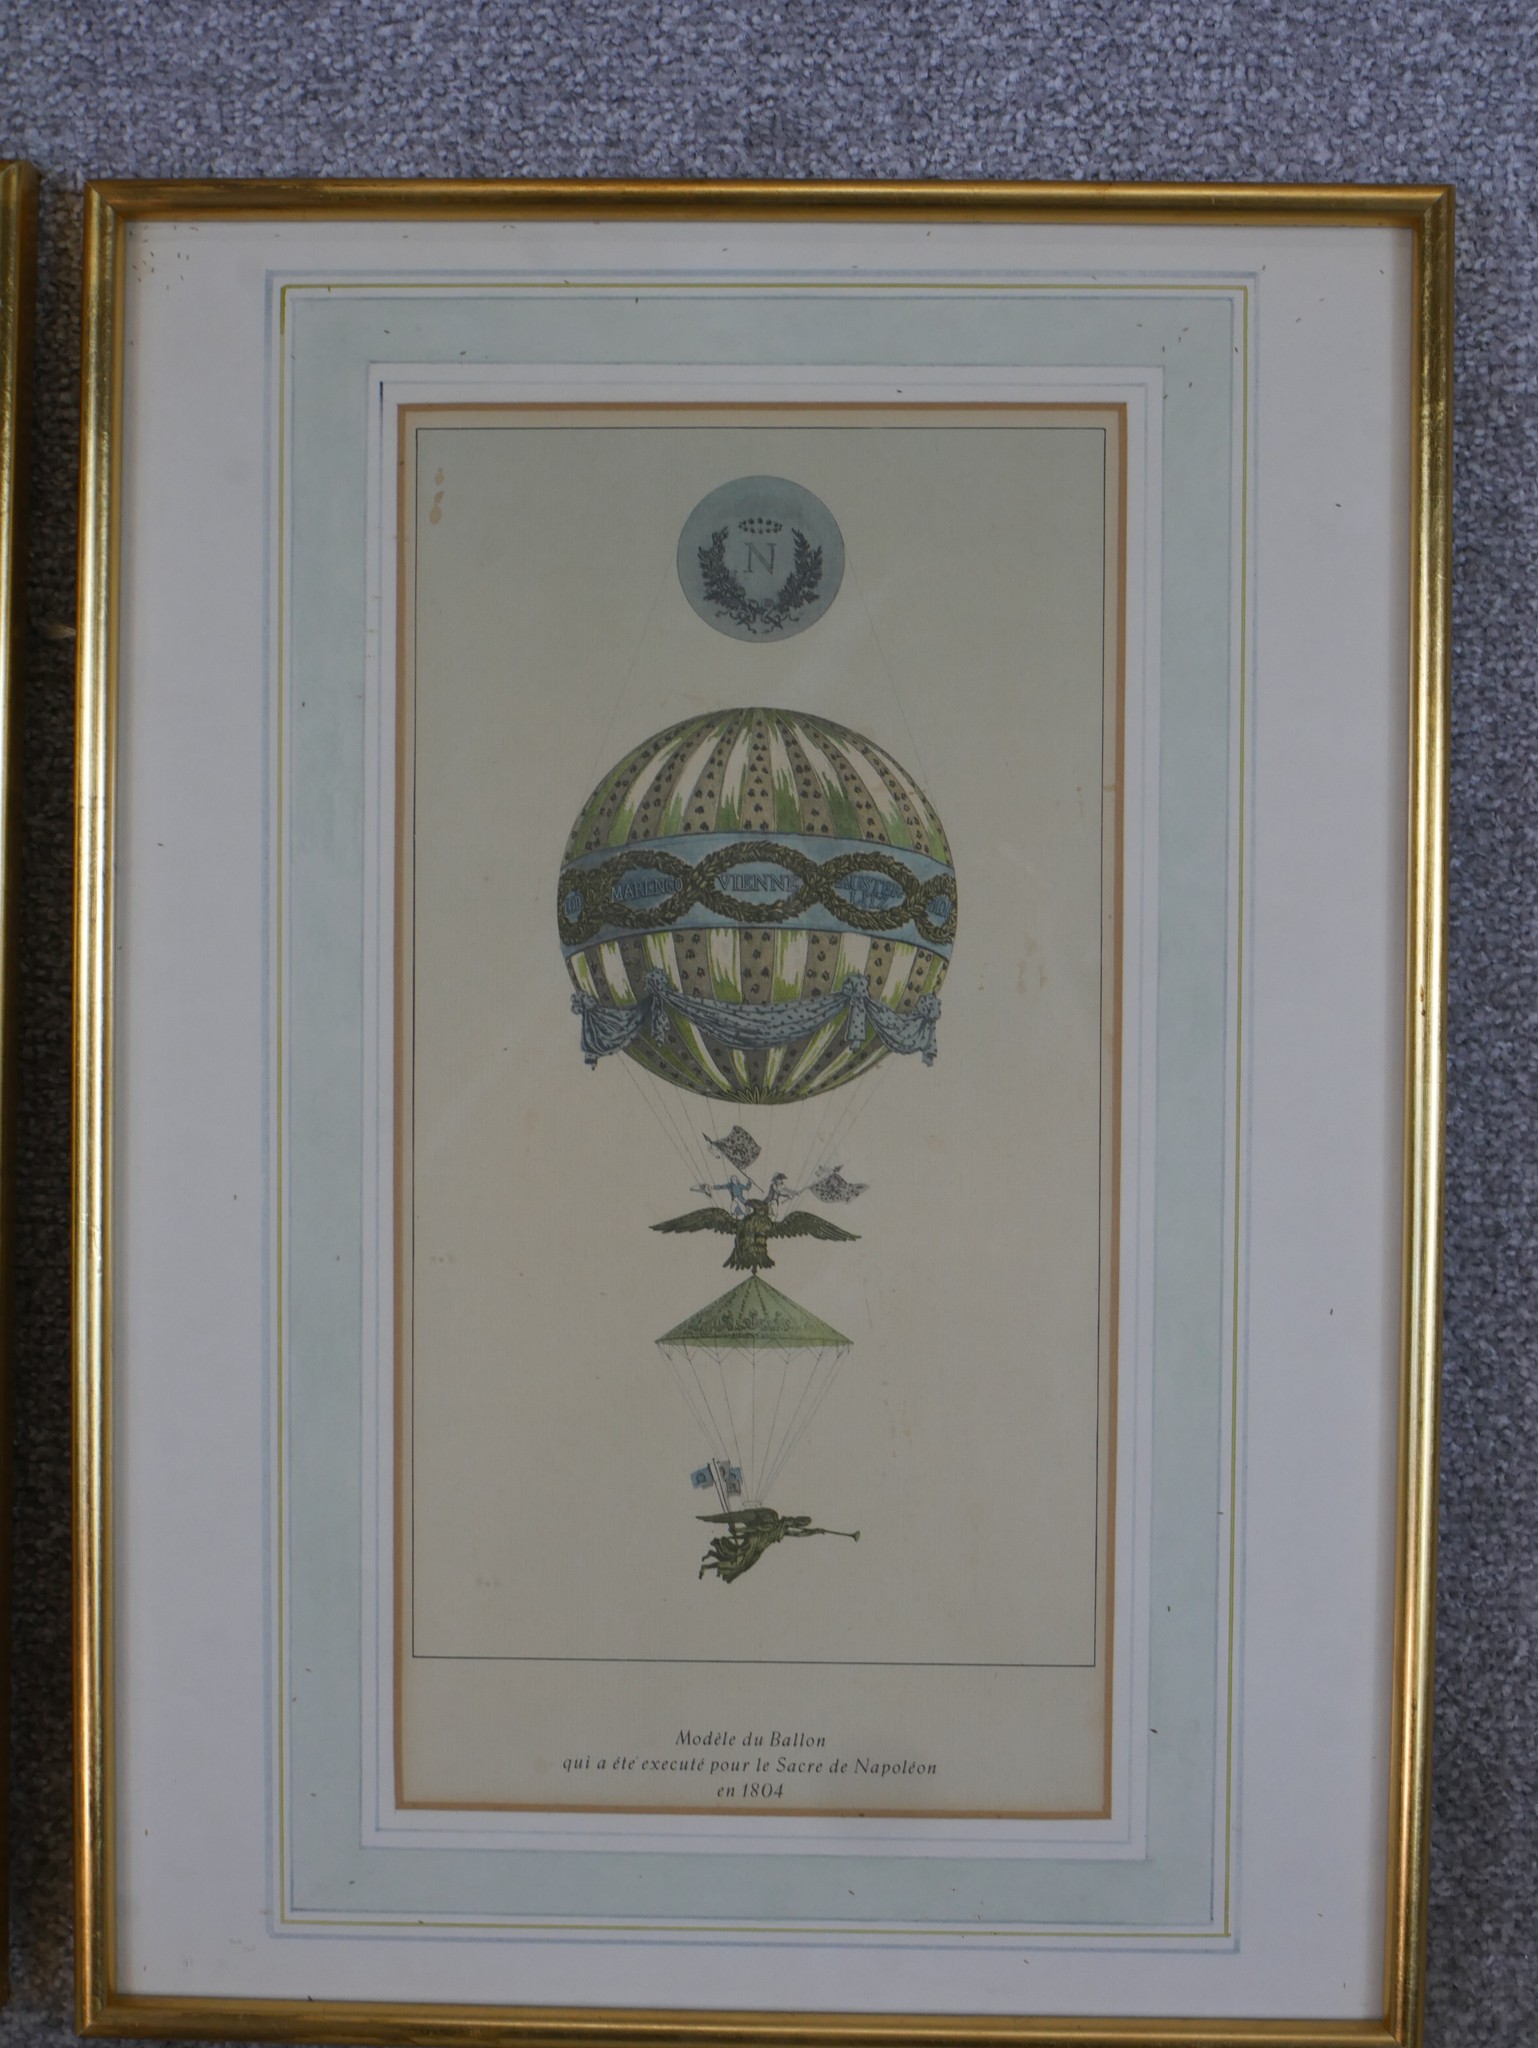 Ascent of James Sadler Two & Modele du Balloon two hot balloon related coloured prints, each - Image 5 of 6